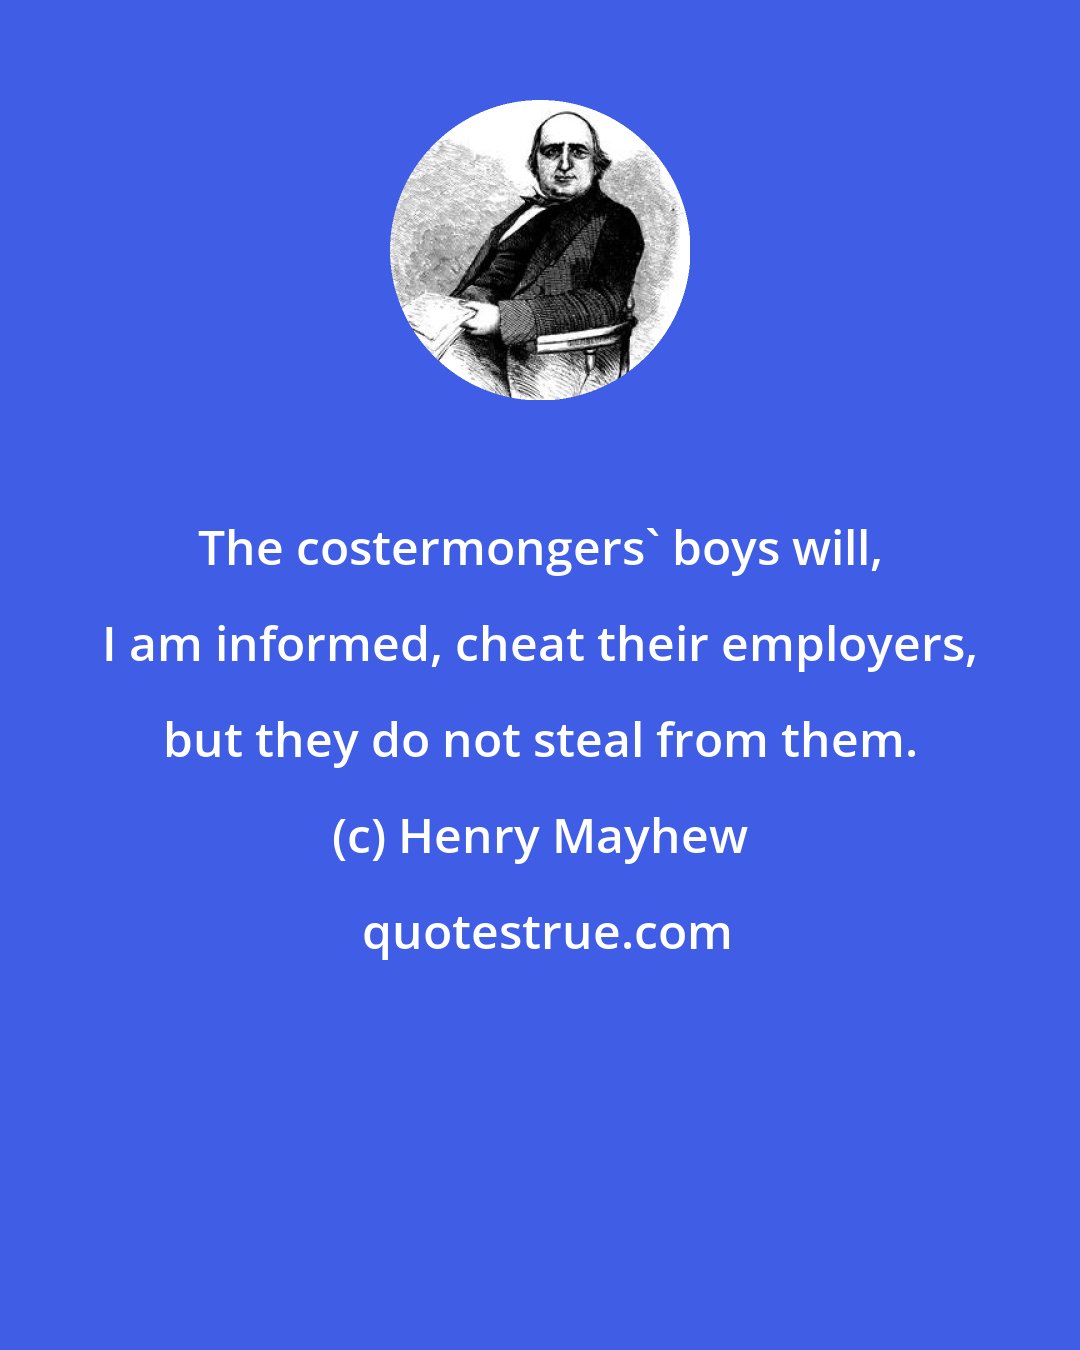 Henry Mayhew: The costermongers' boys will, I am informed, cheat their employers, but they do not steal from them.